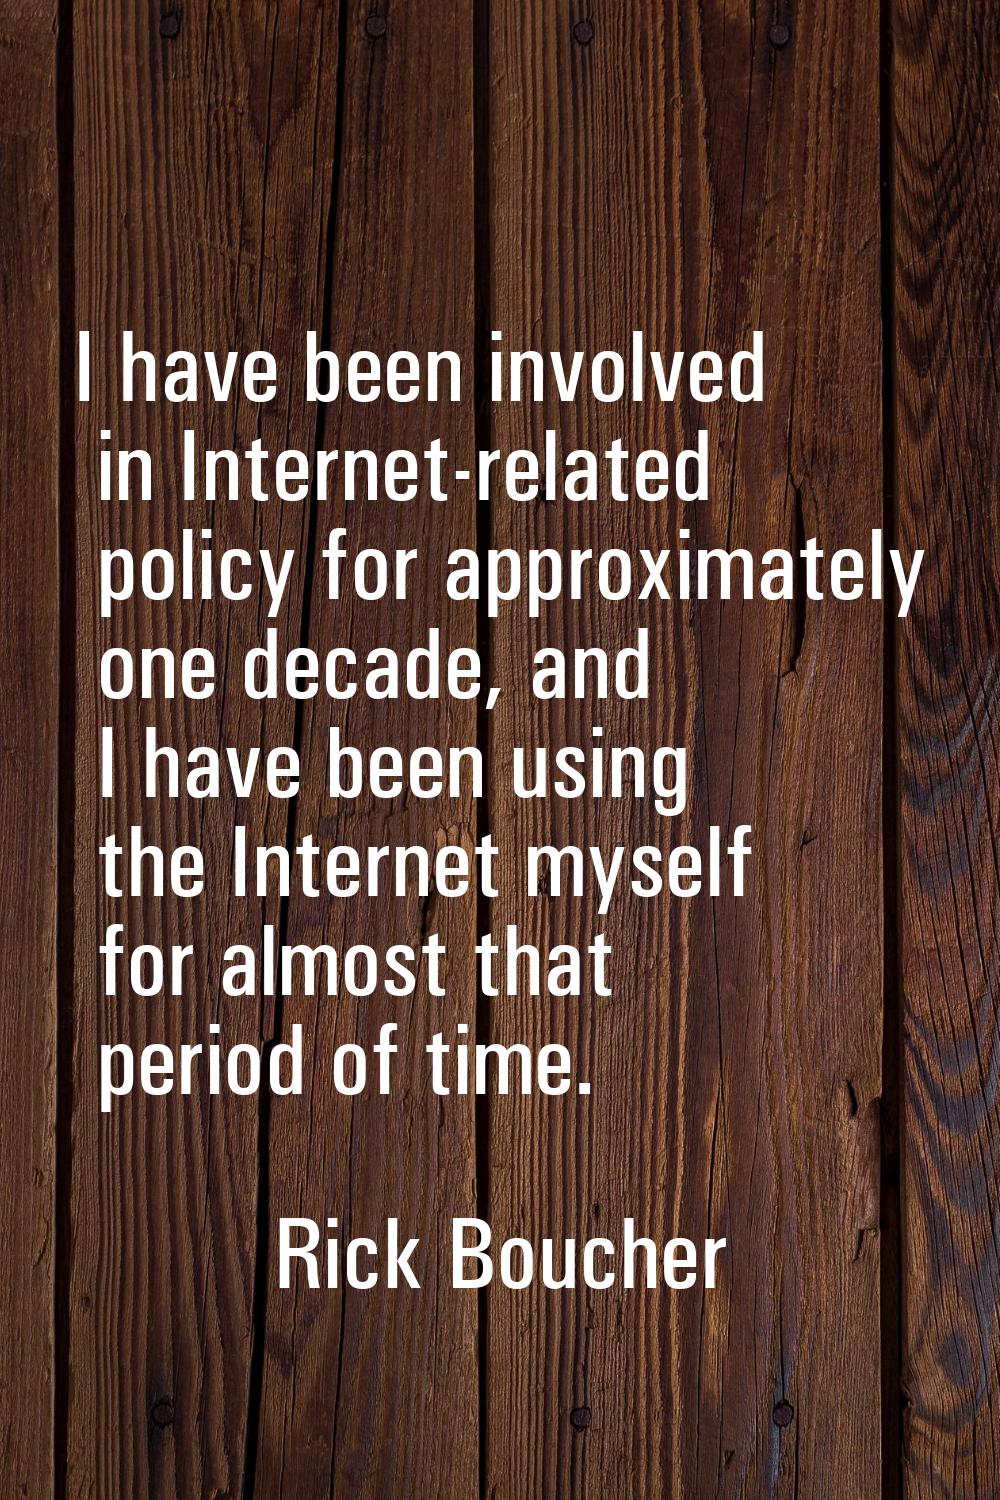 I have been involved in Internet-related policy for approximately one decade, and I have been using